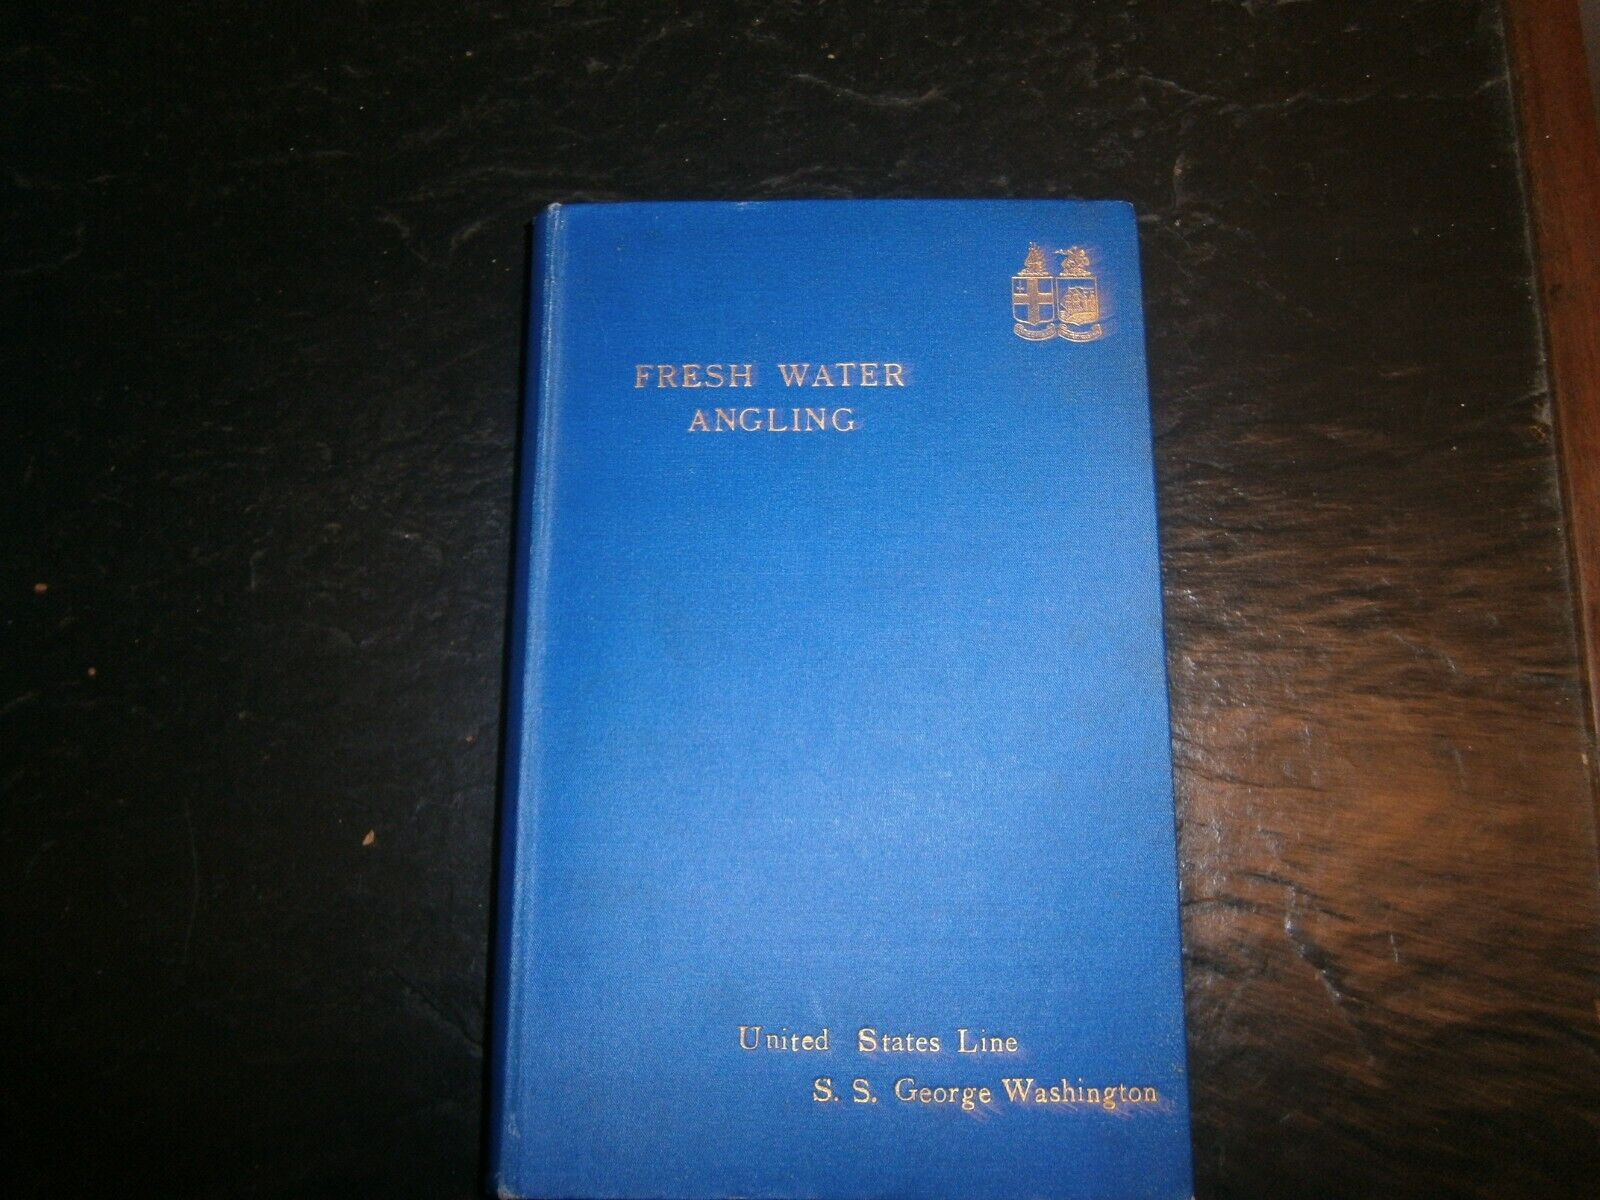 Fresh Water Angling 1925 HC Great Western Railroad,United States Line,S.S.G.W.